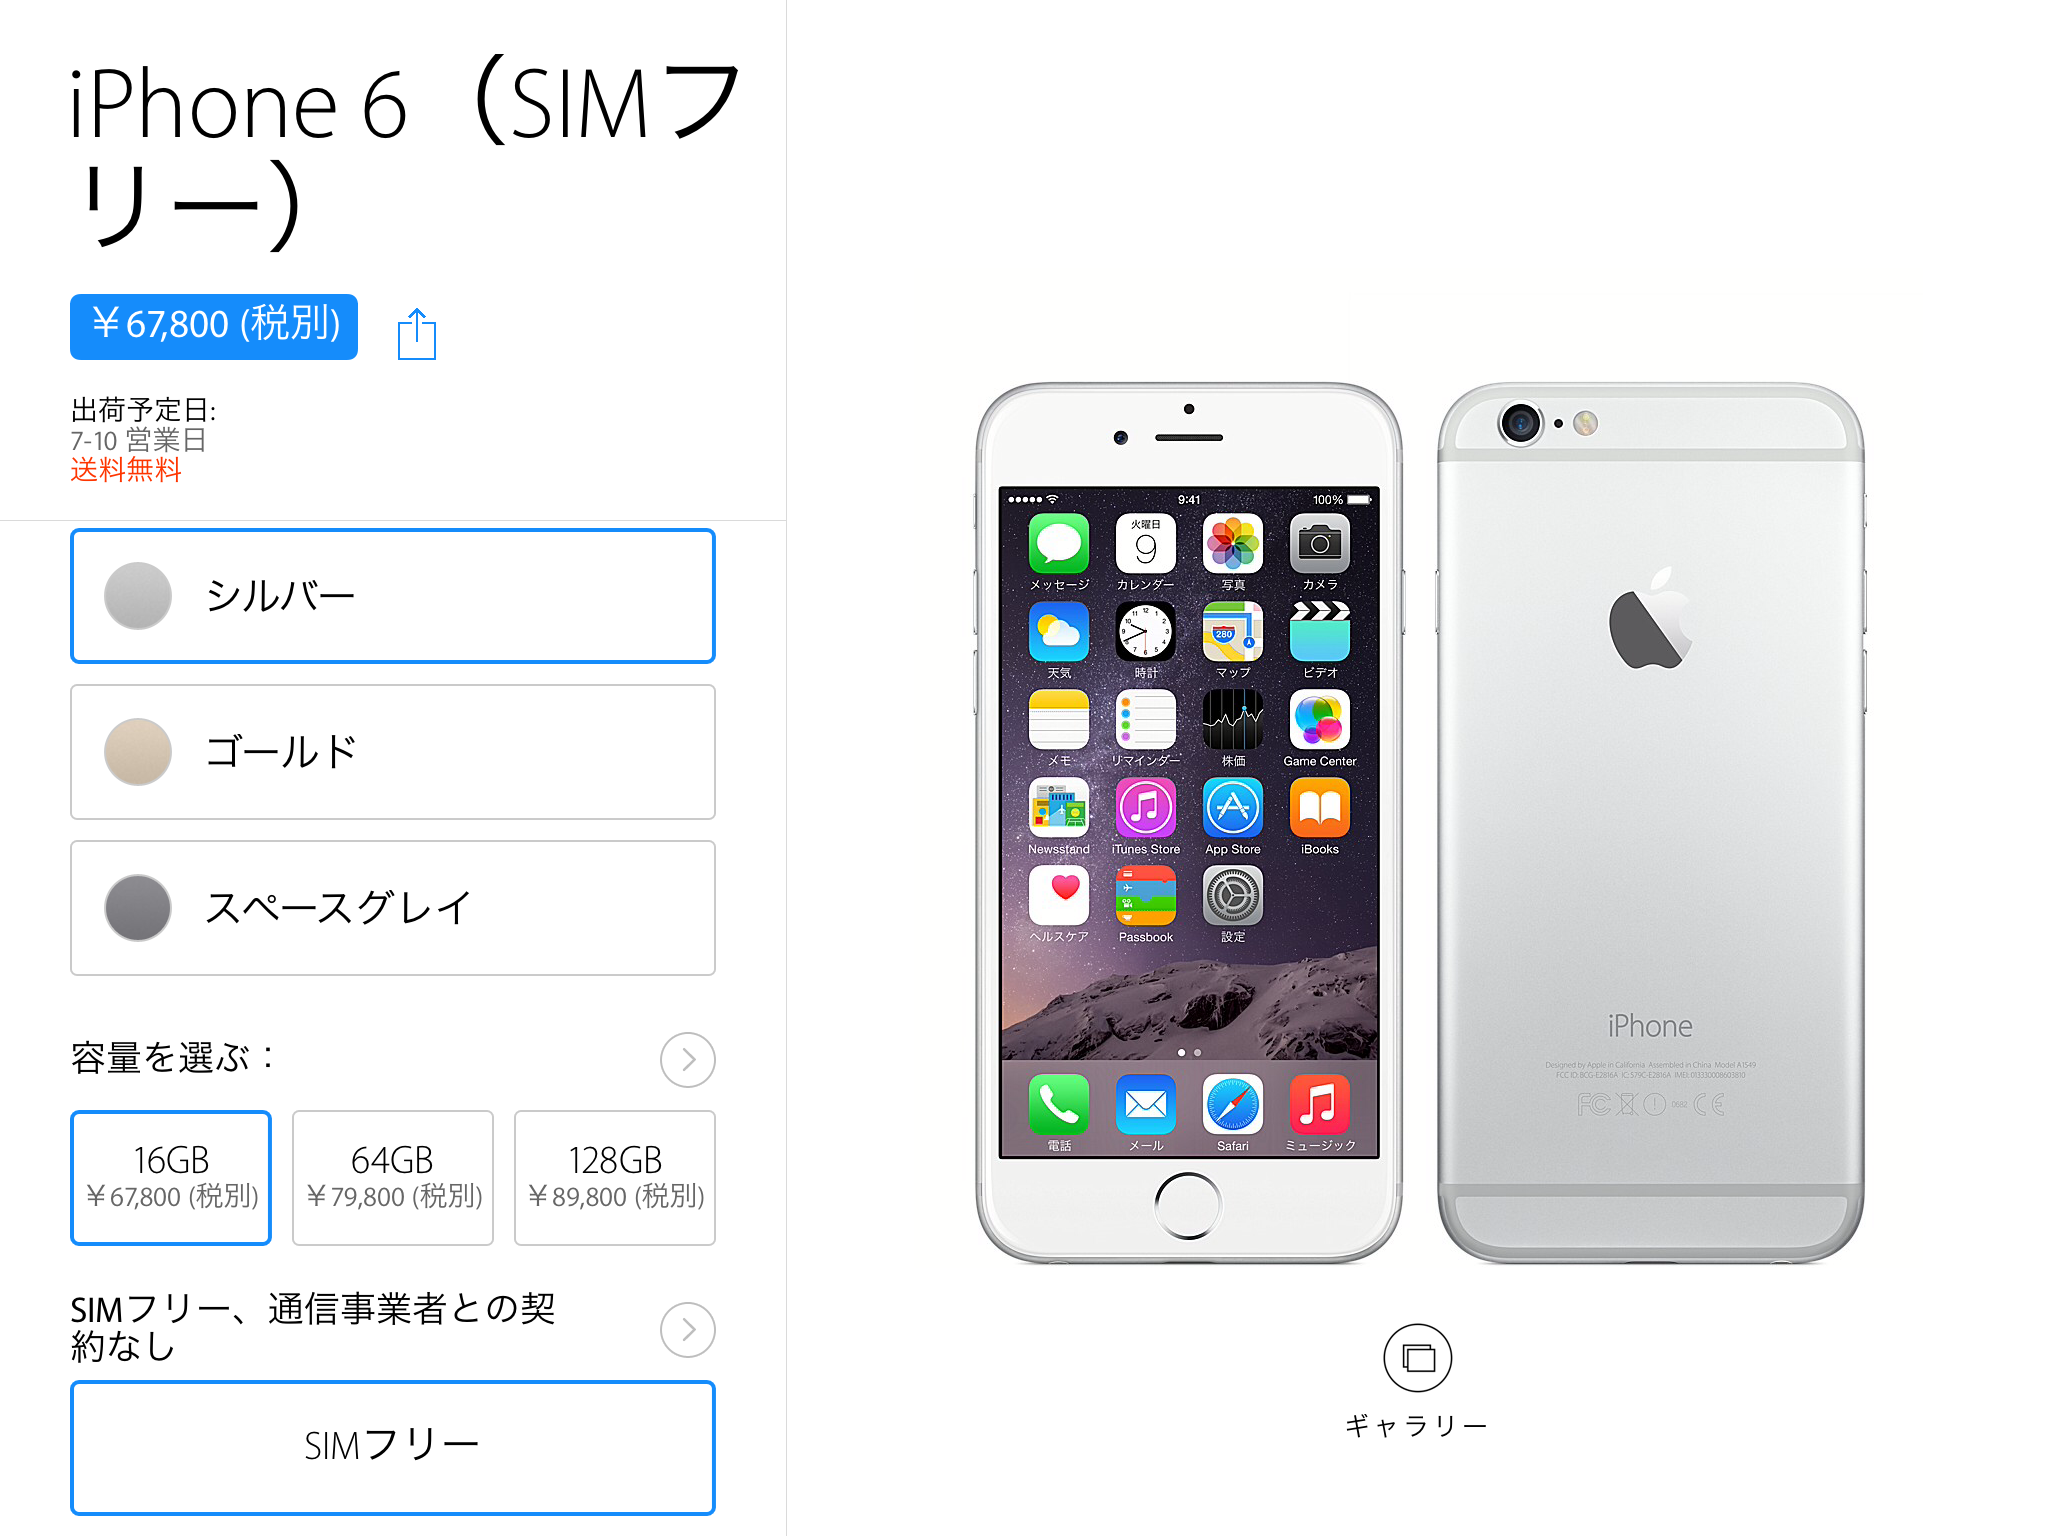 apple online store i[phone6 shipment in 7 to 10 days